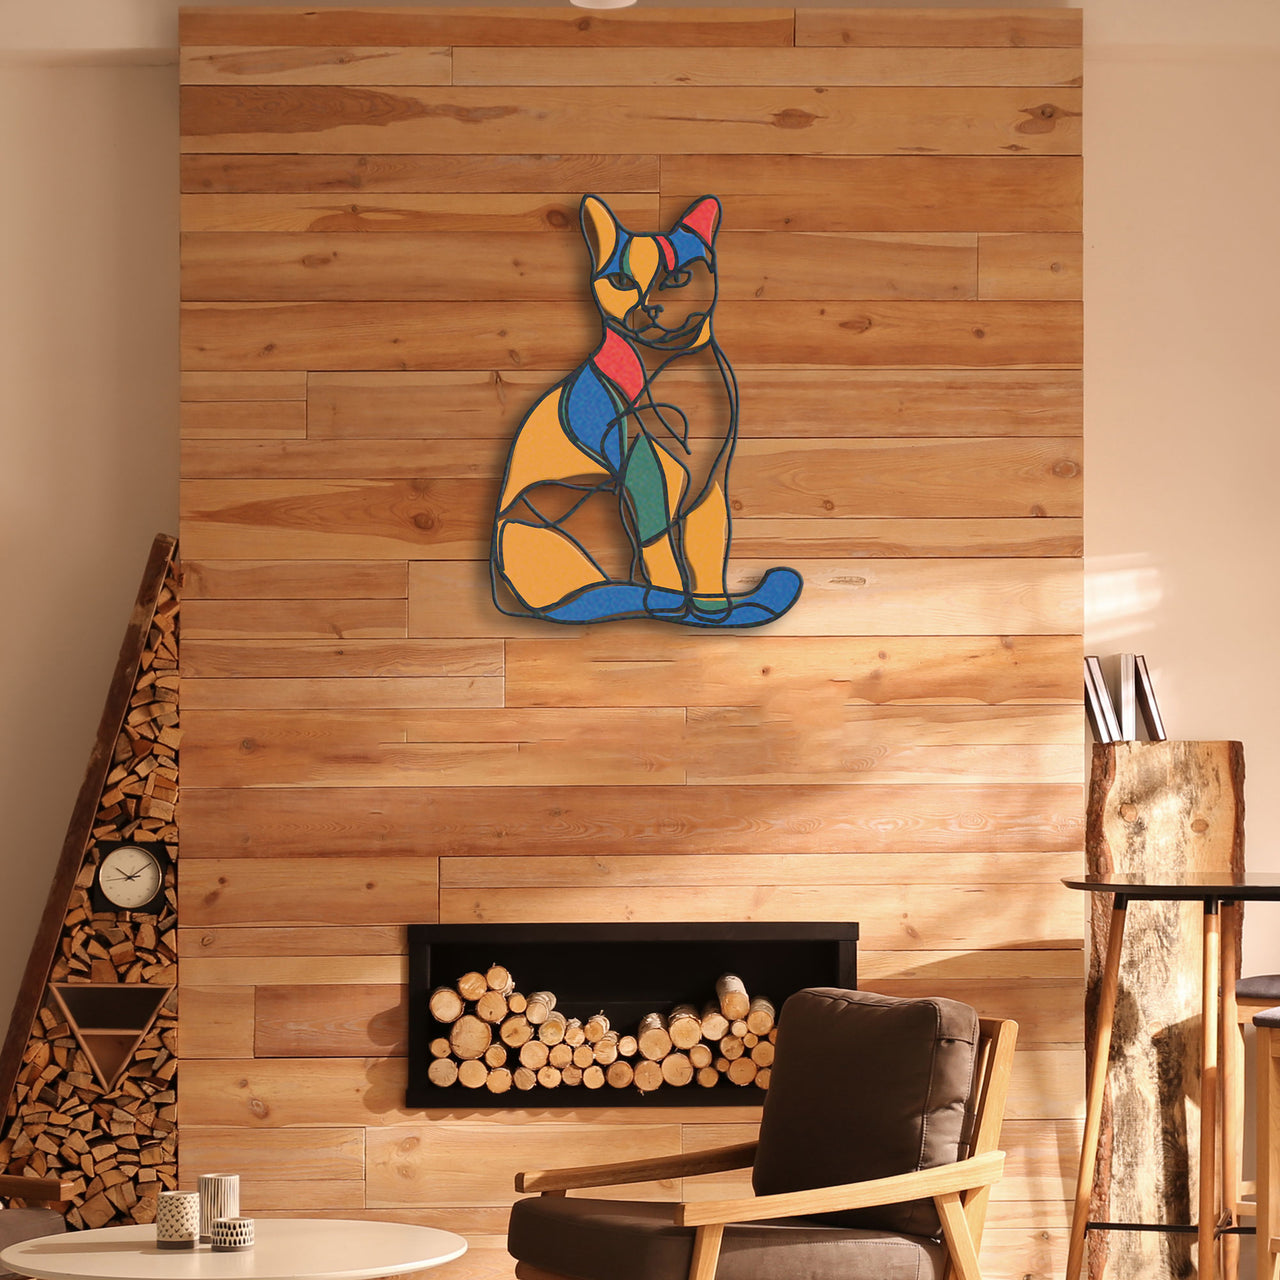 Abstract Cat Metal Wall Art, Gift for Cat Lovers, Perfect for Cat Enthusiasts